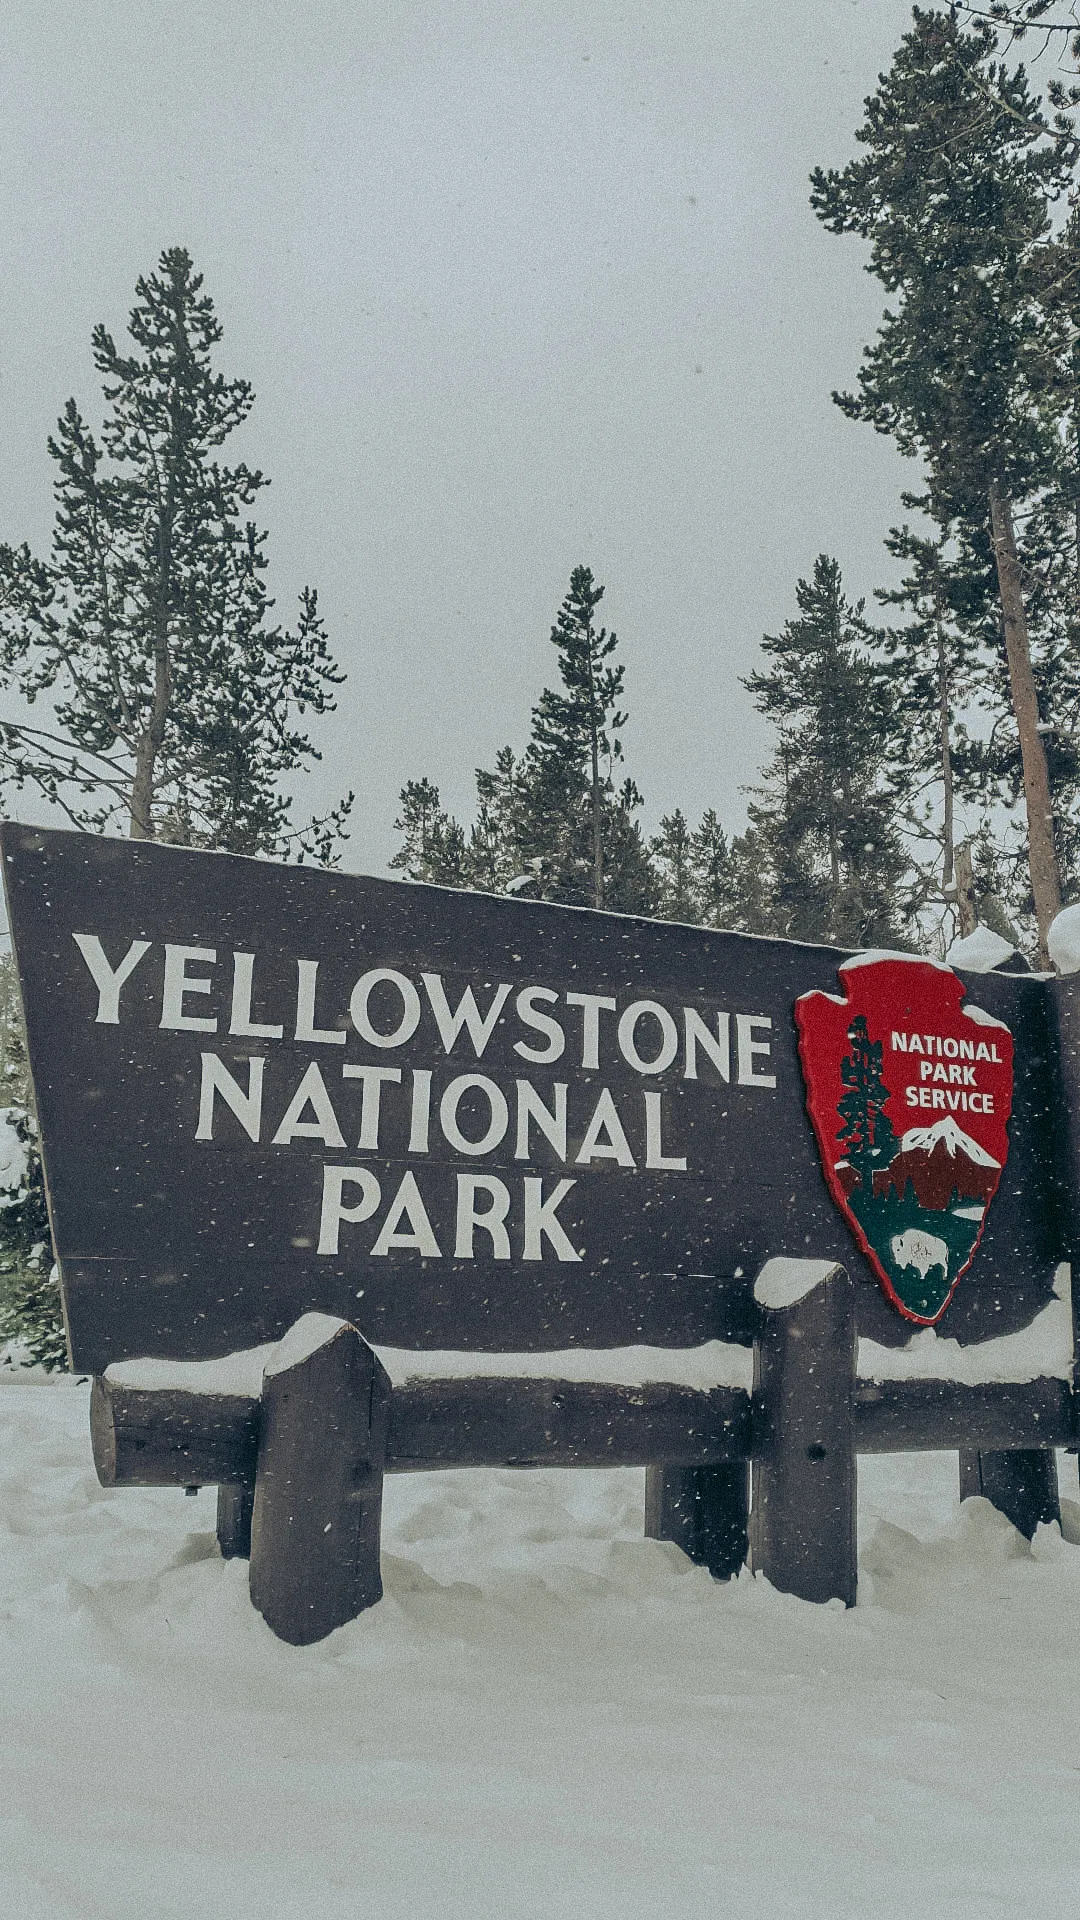 Yellowstone park entrance sign in winter